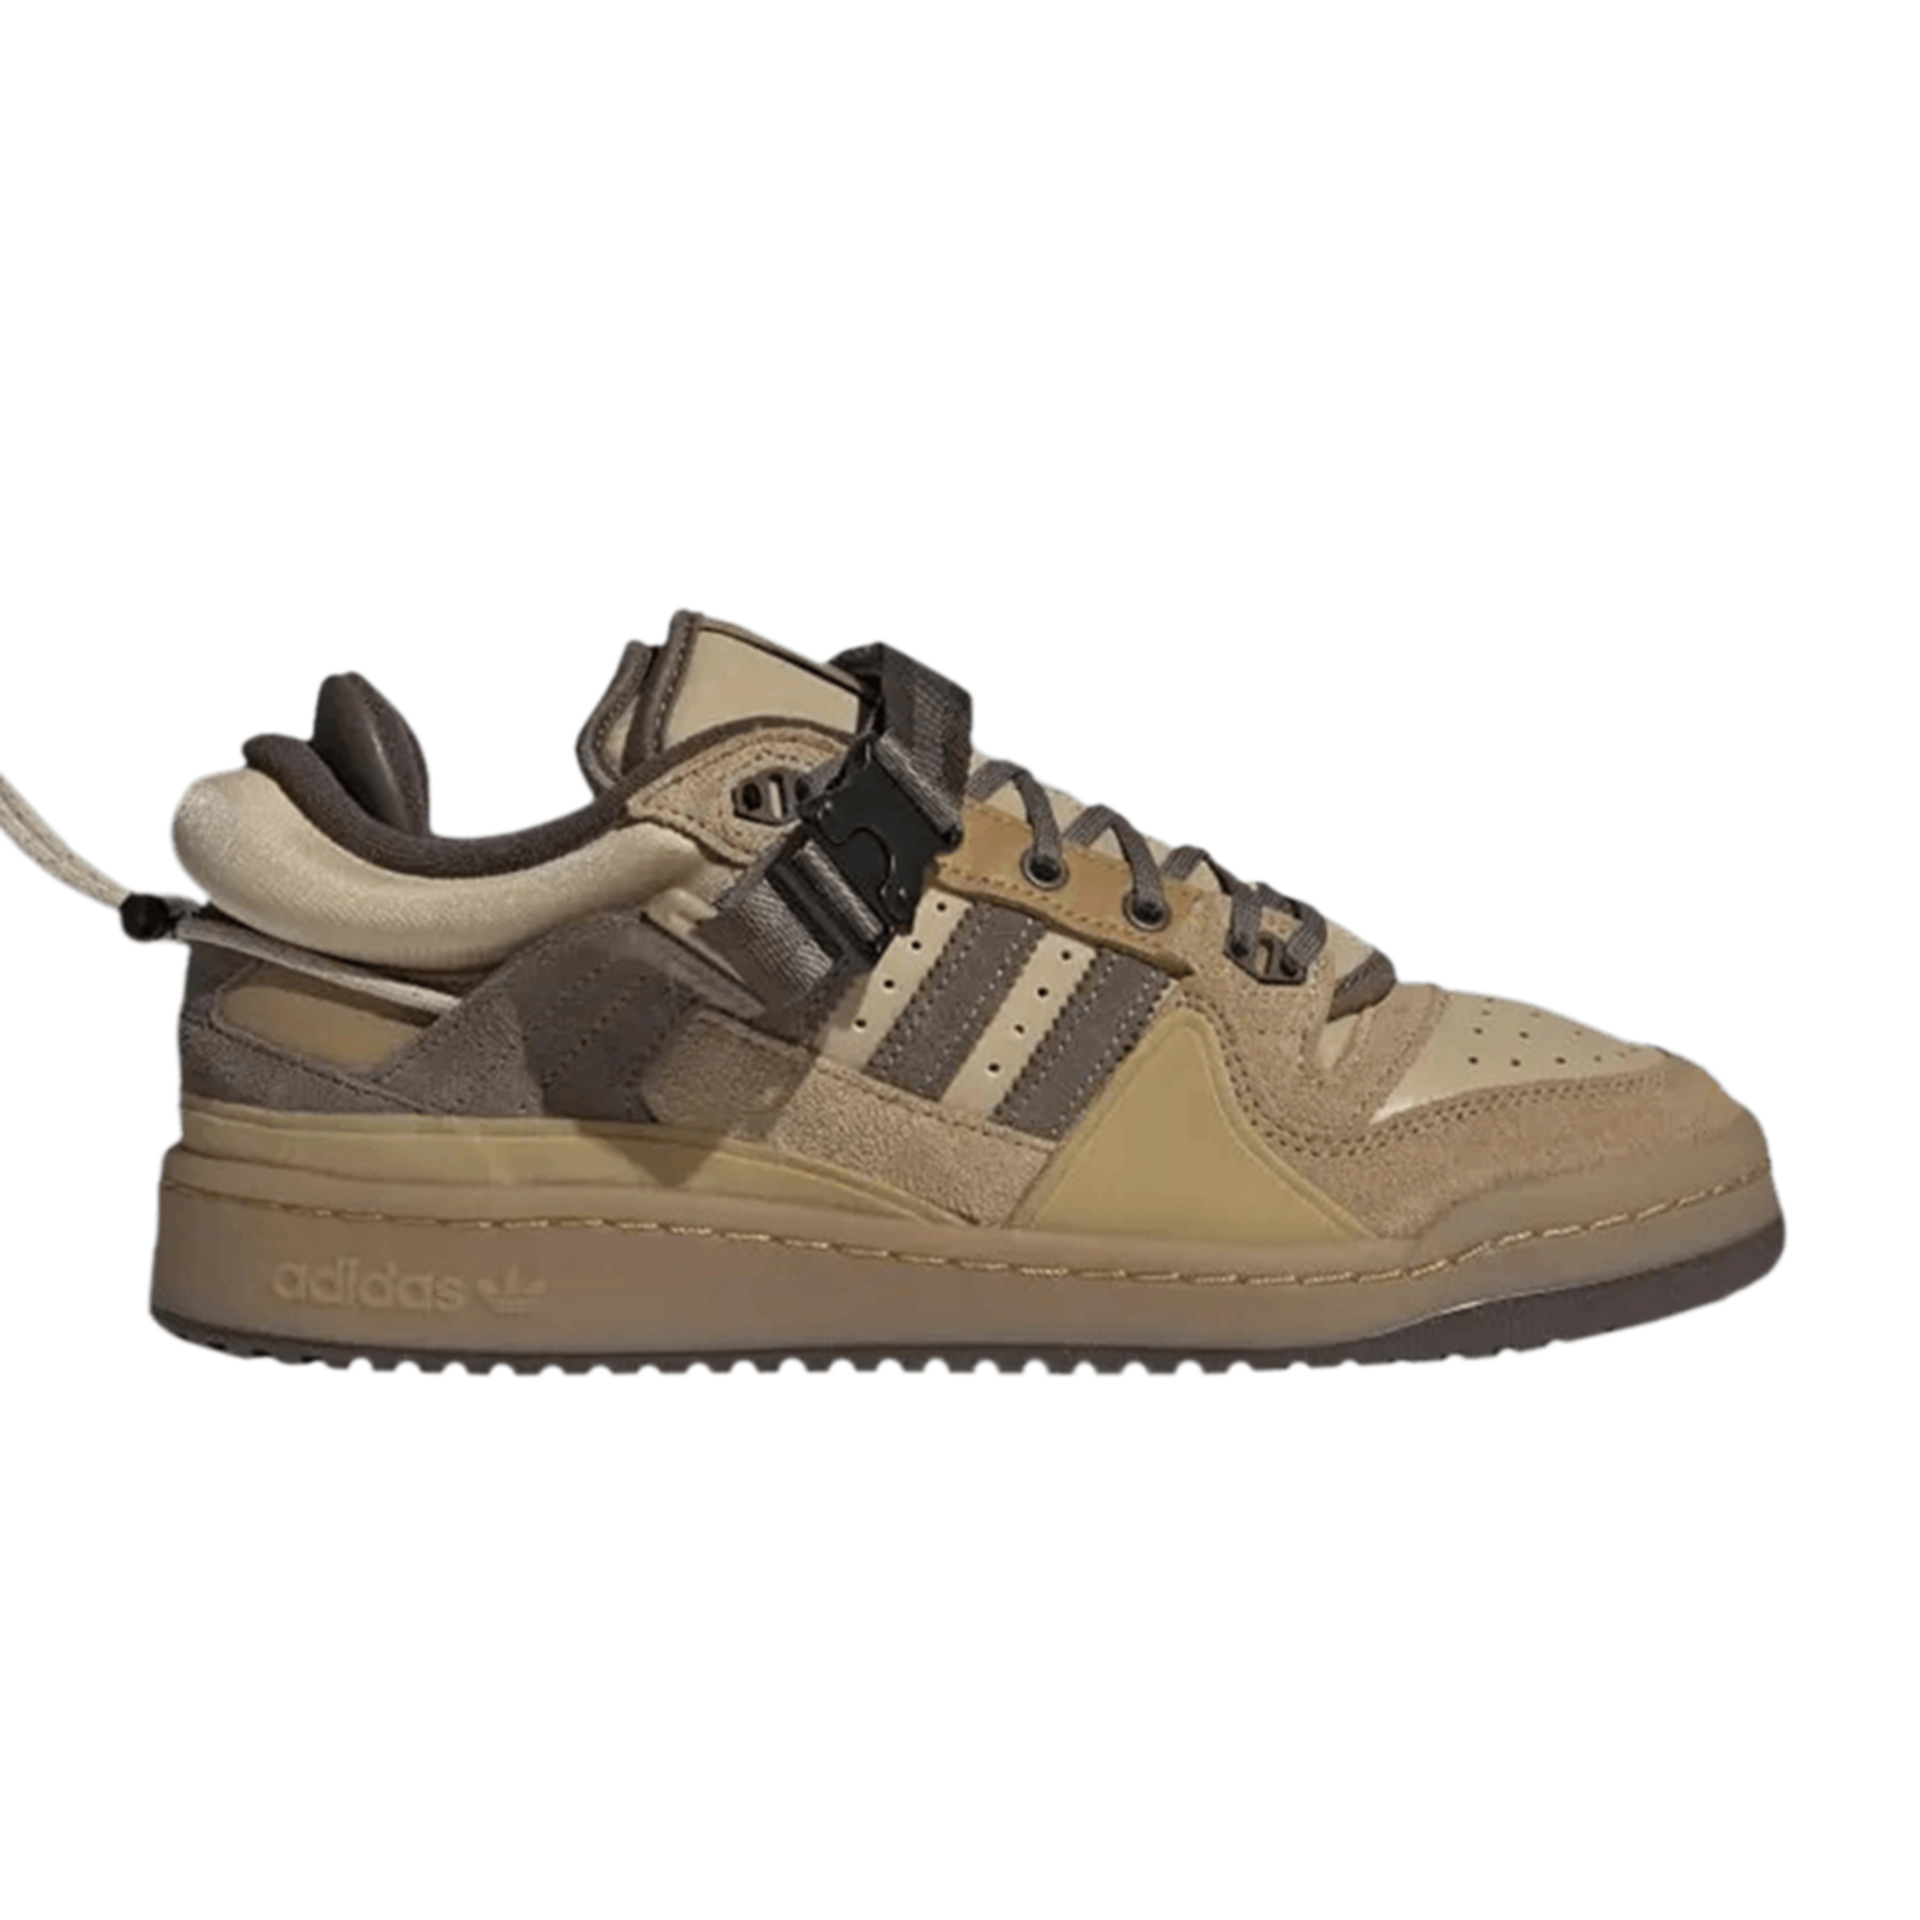 adidas Bad Bunny x Forum Buckle Low 'The First Cafe'